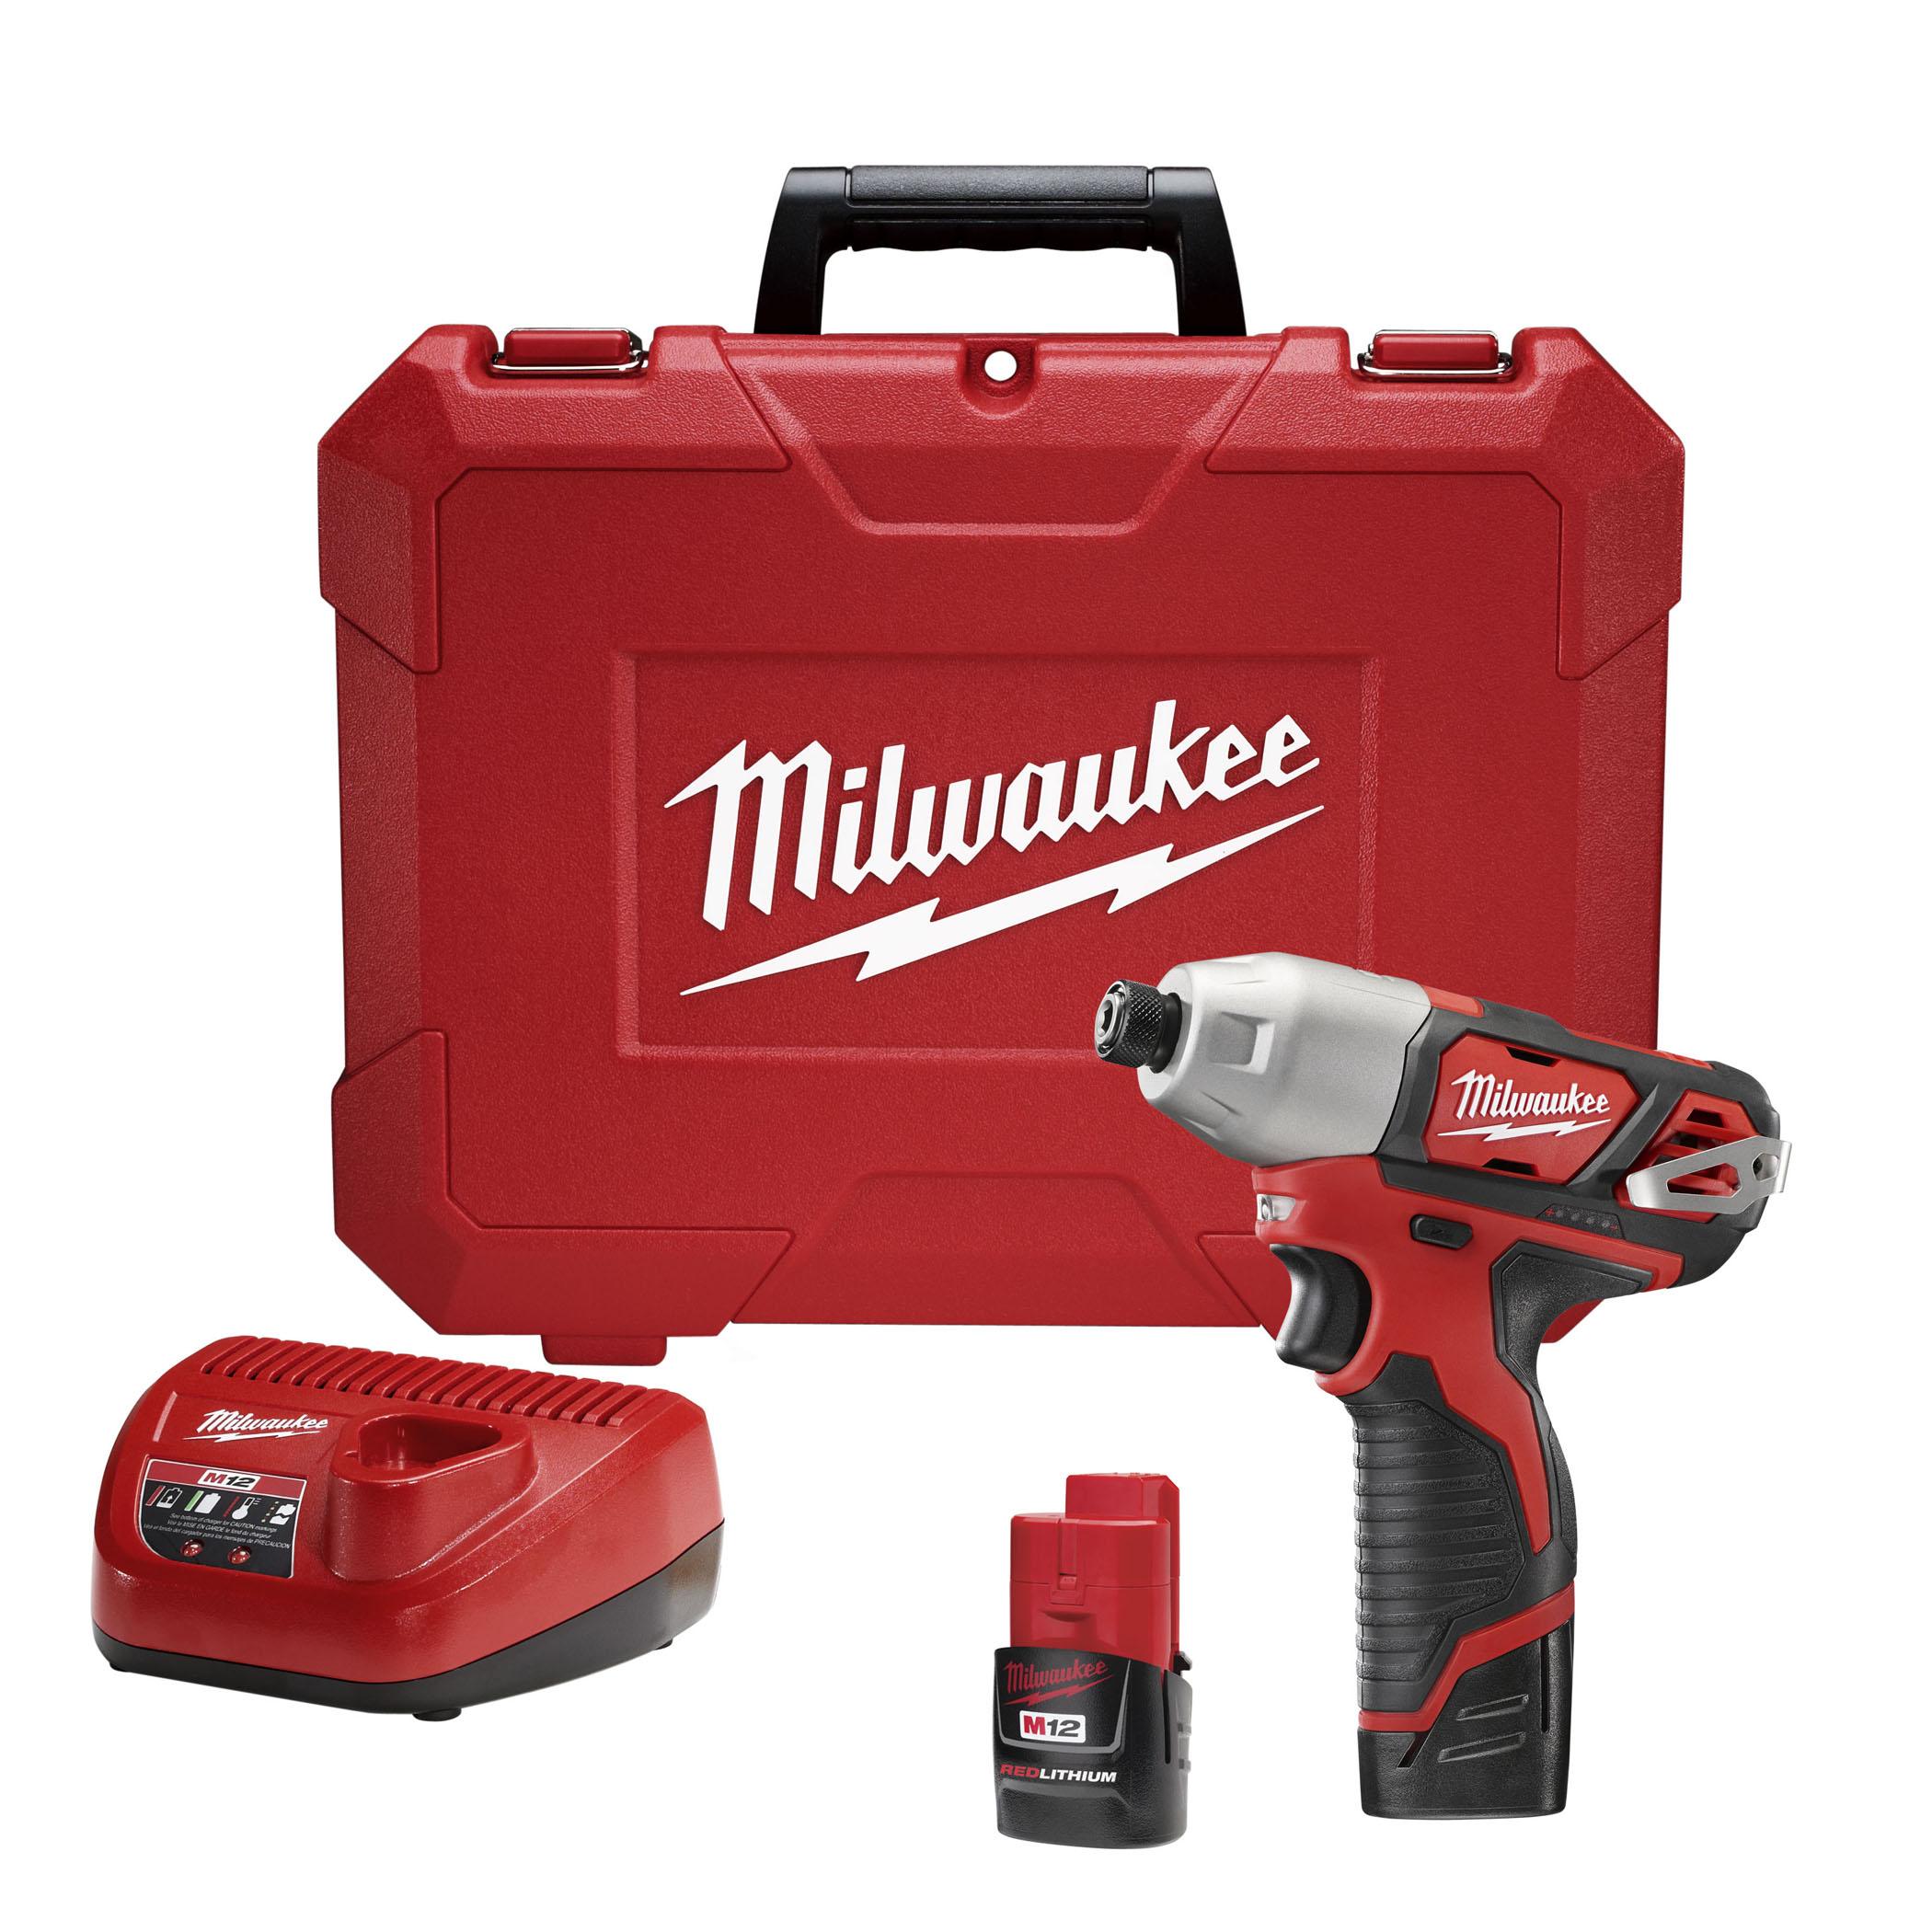 M12 12 Volt Lithium-Ion Cordless 1/4 In. Hex Impact Driver Kit